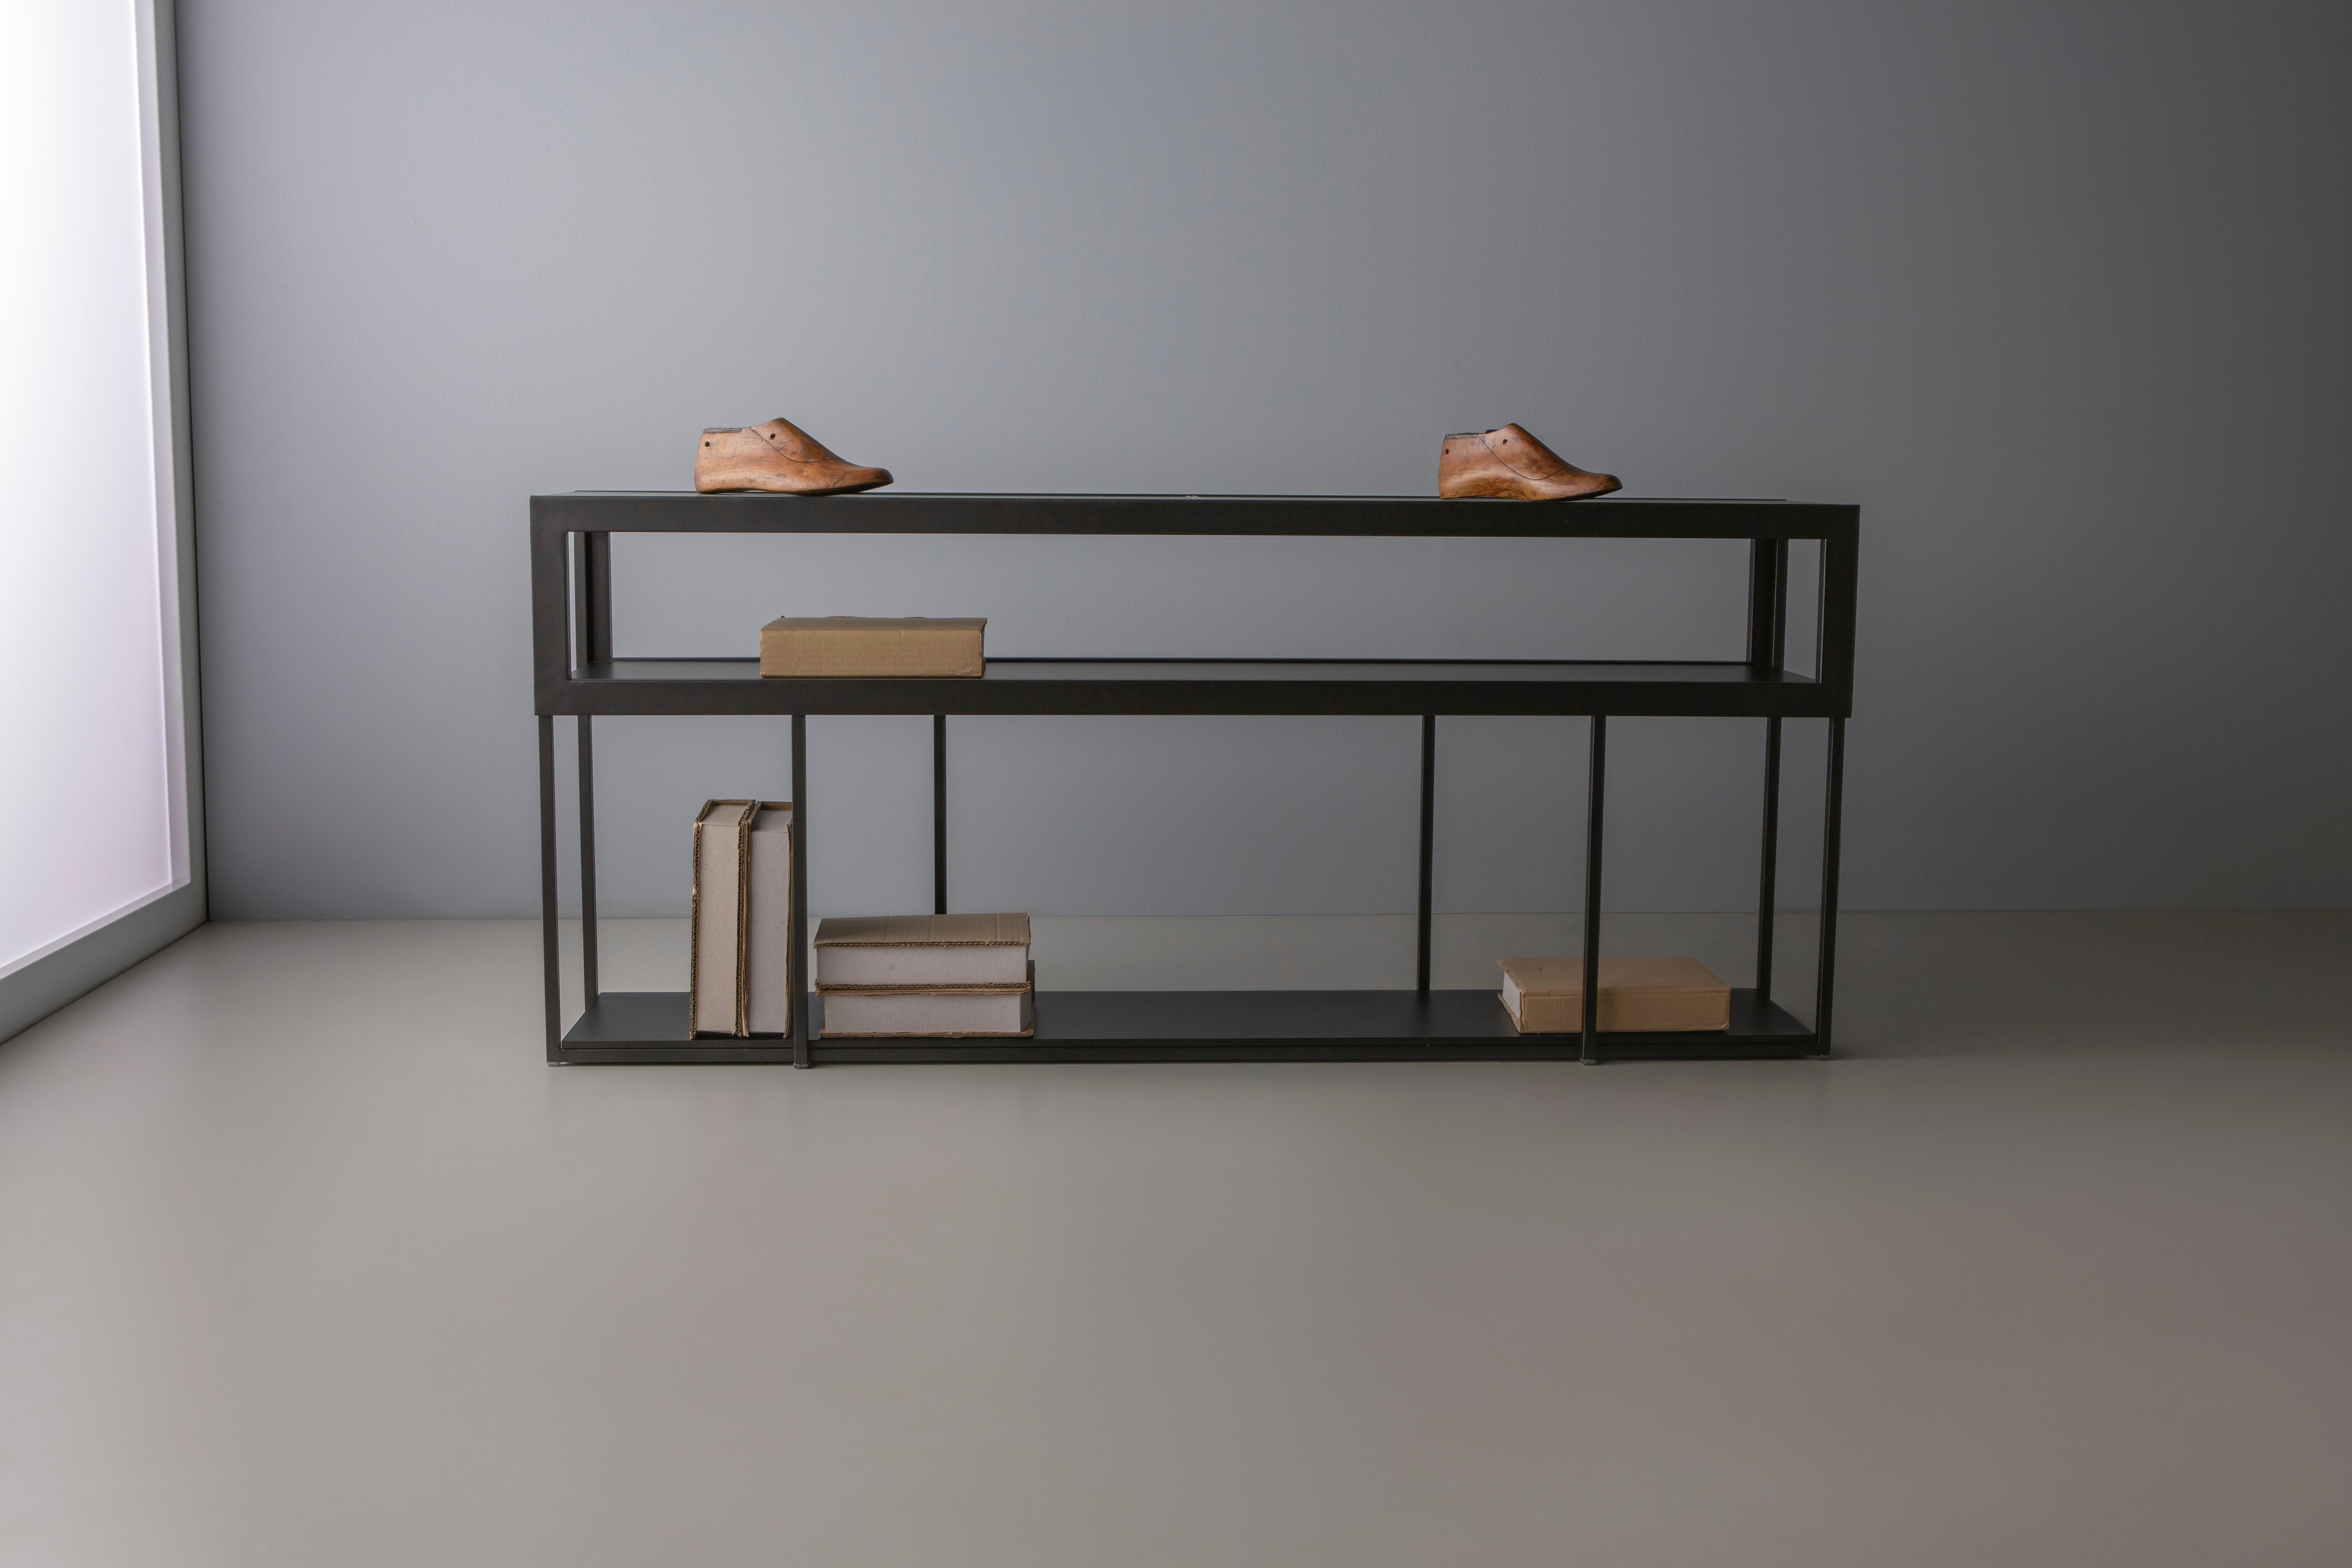 Low Frame Bookcase by Doimo Brasil
Dimensions:  W 150 x D 30 x H 65 cm 
Materials: Structure: painted metal, Top: leather, Shelf: venner.
  

With the intention of providing good taste and personality, Doimo deciphers trends and follows the